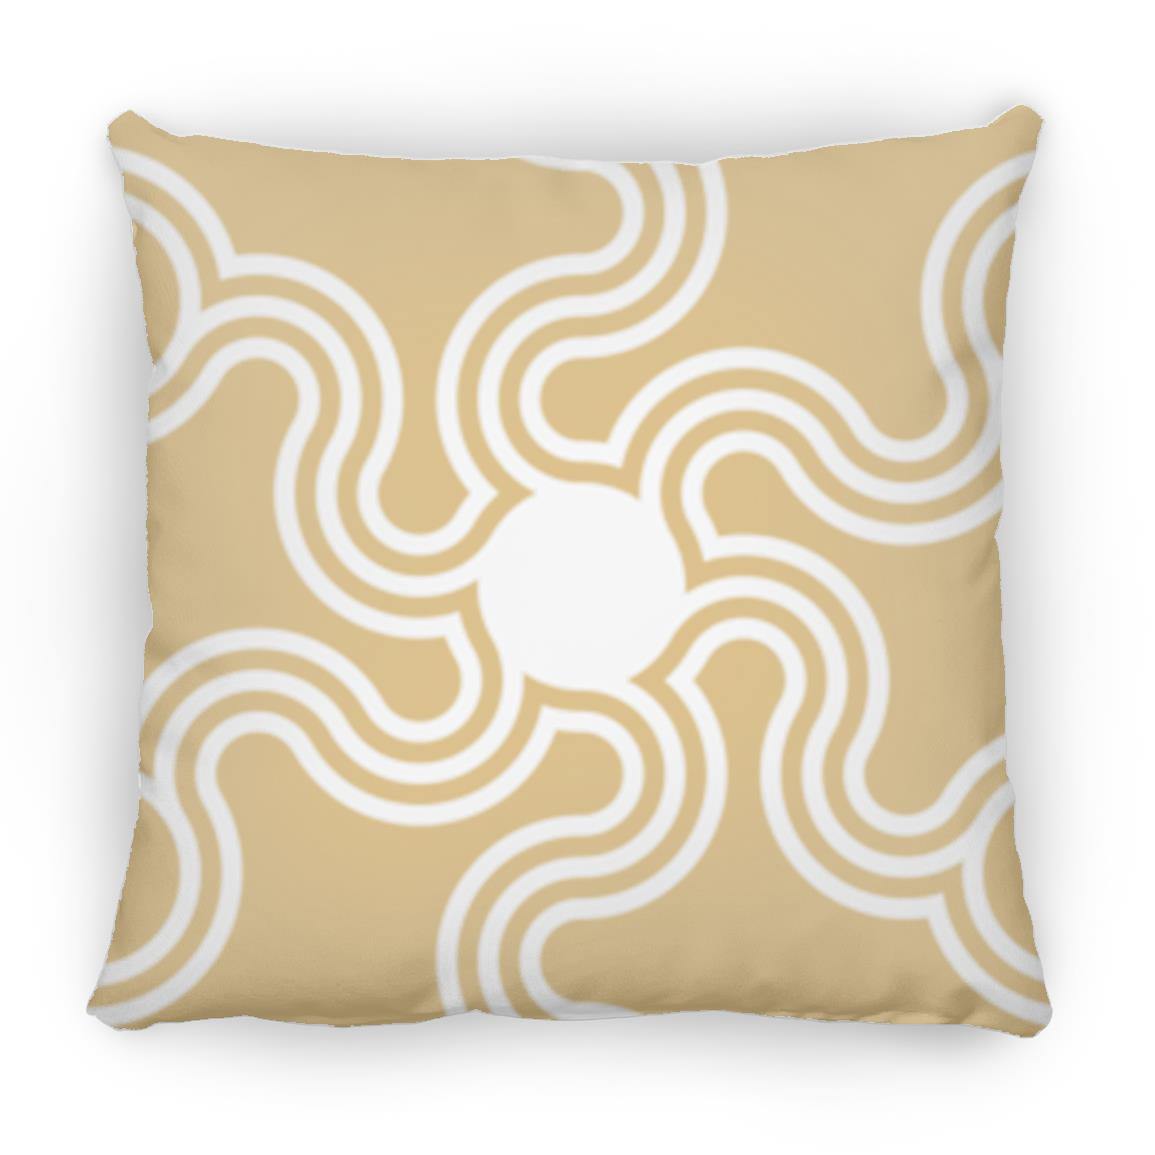 Crop Circle Pillow - Pepperbox Hill - Shapes of Wisdom